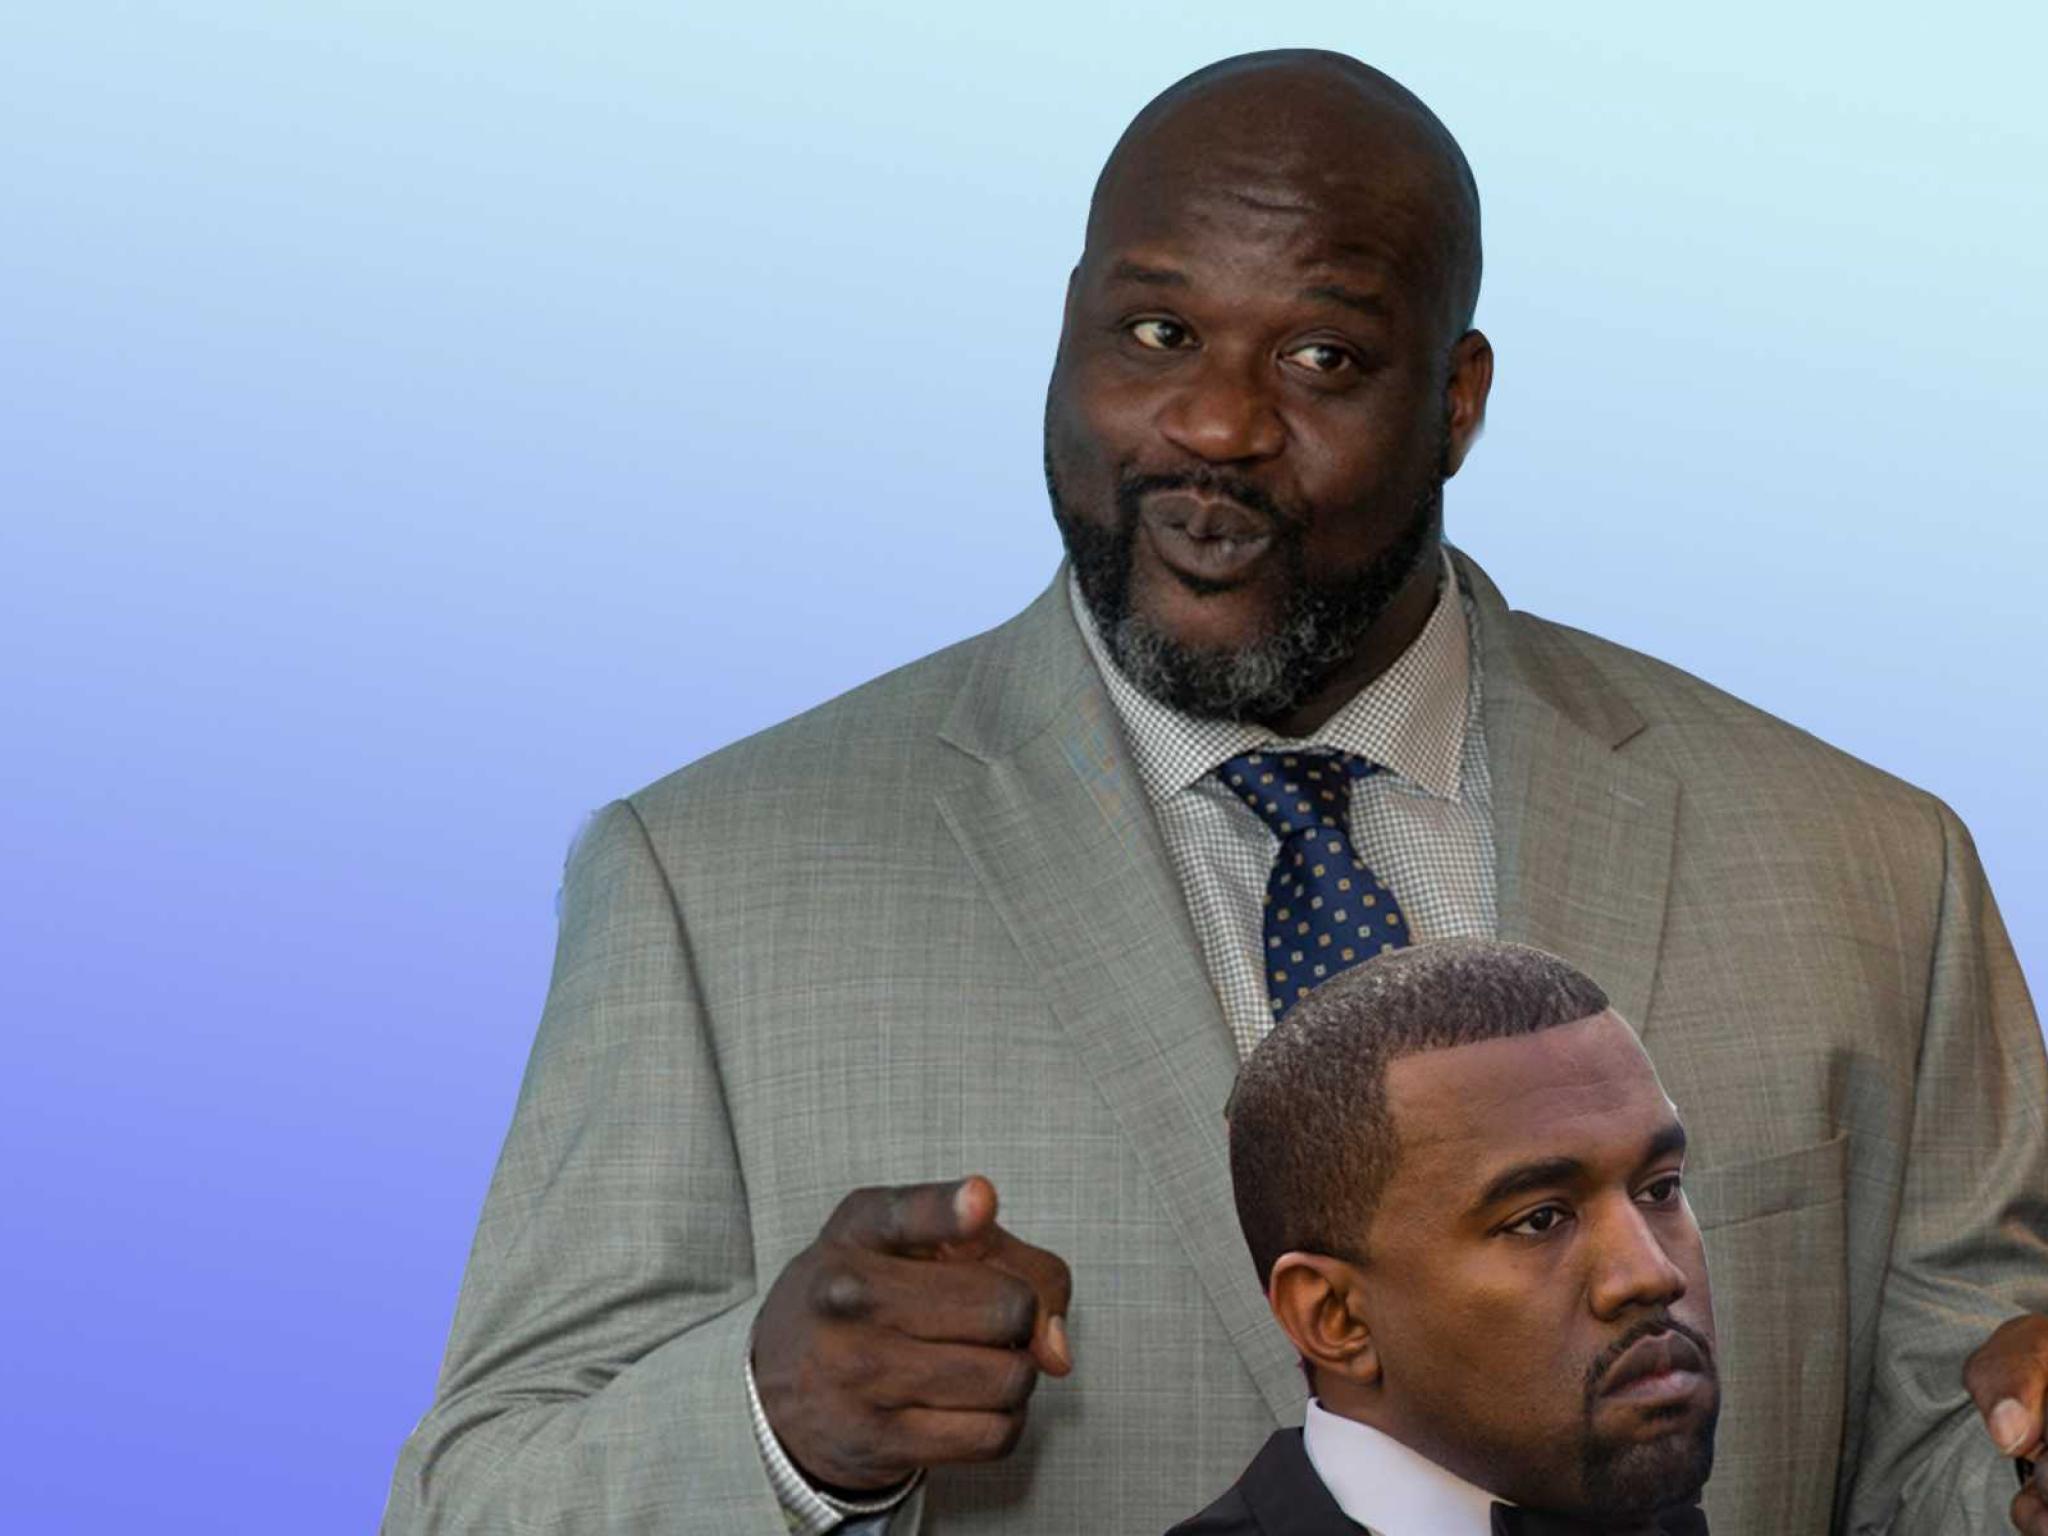  kanye-get-a-grip-taking-on-shaquille-oneals-business-practices-not-a-great-idea-but-what-else-is-new 